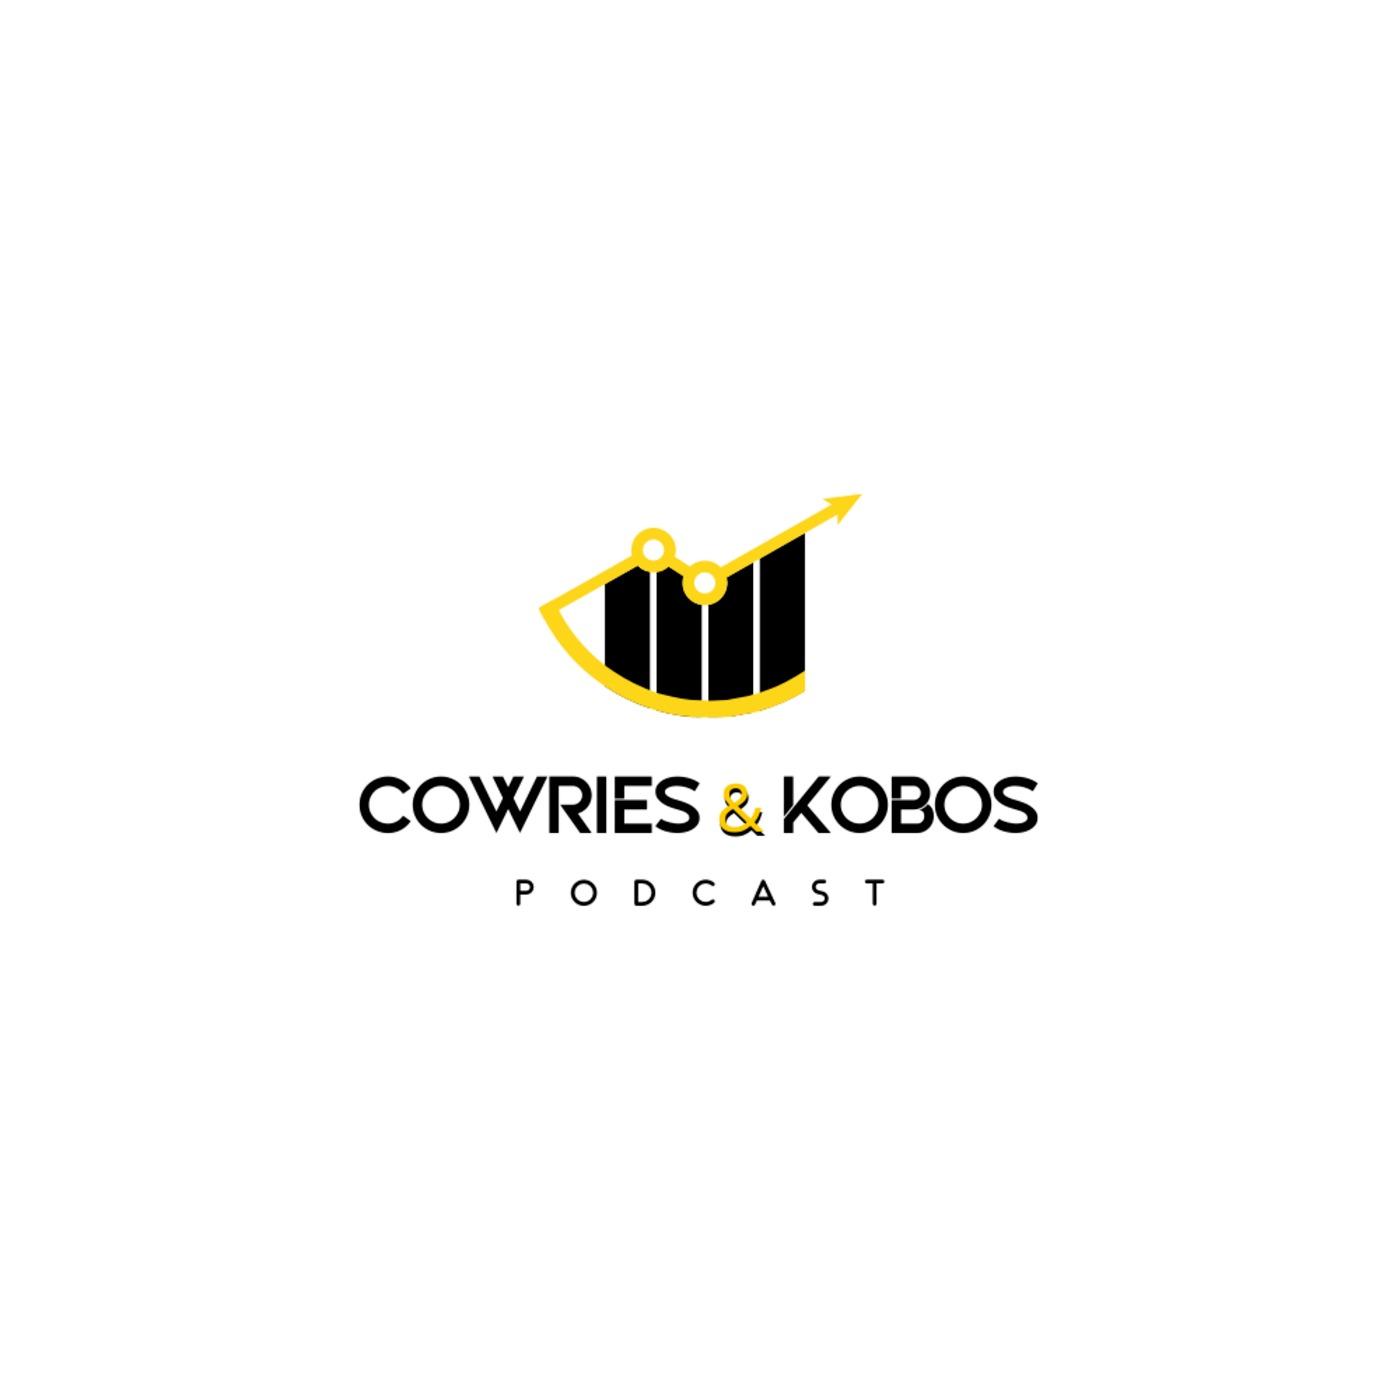 Cowries & Kobos Podcast: Following Nigeria's Financial and Economic Journey